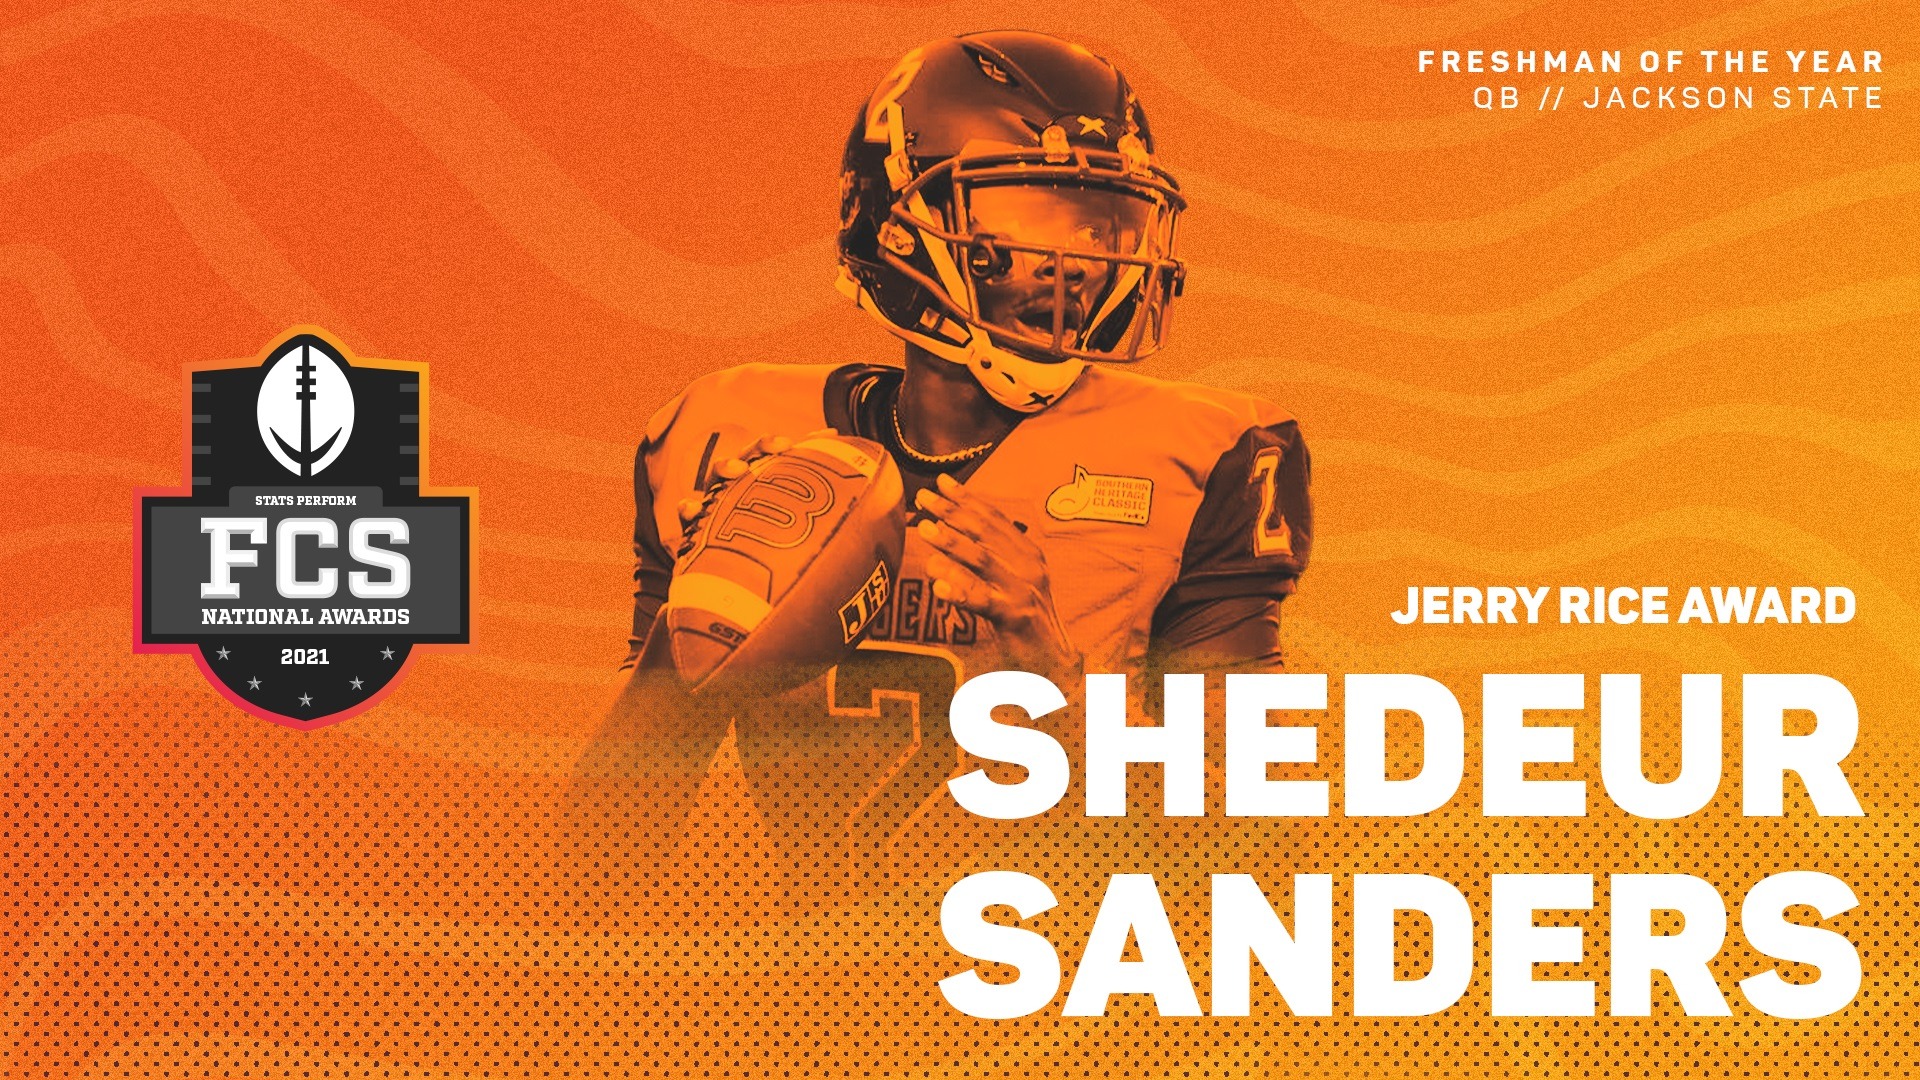 Jackson State QB Shedeur Sanders is 2021 Jerry Rice Award Recipient